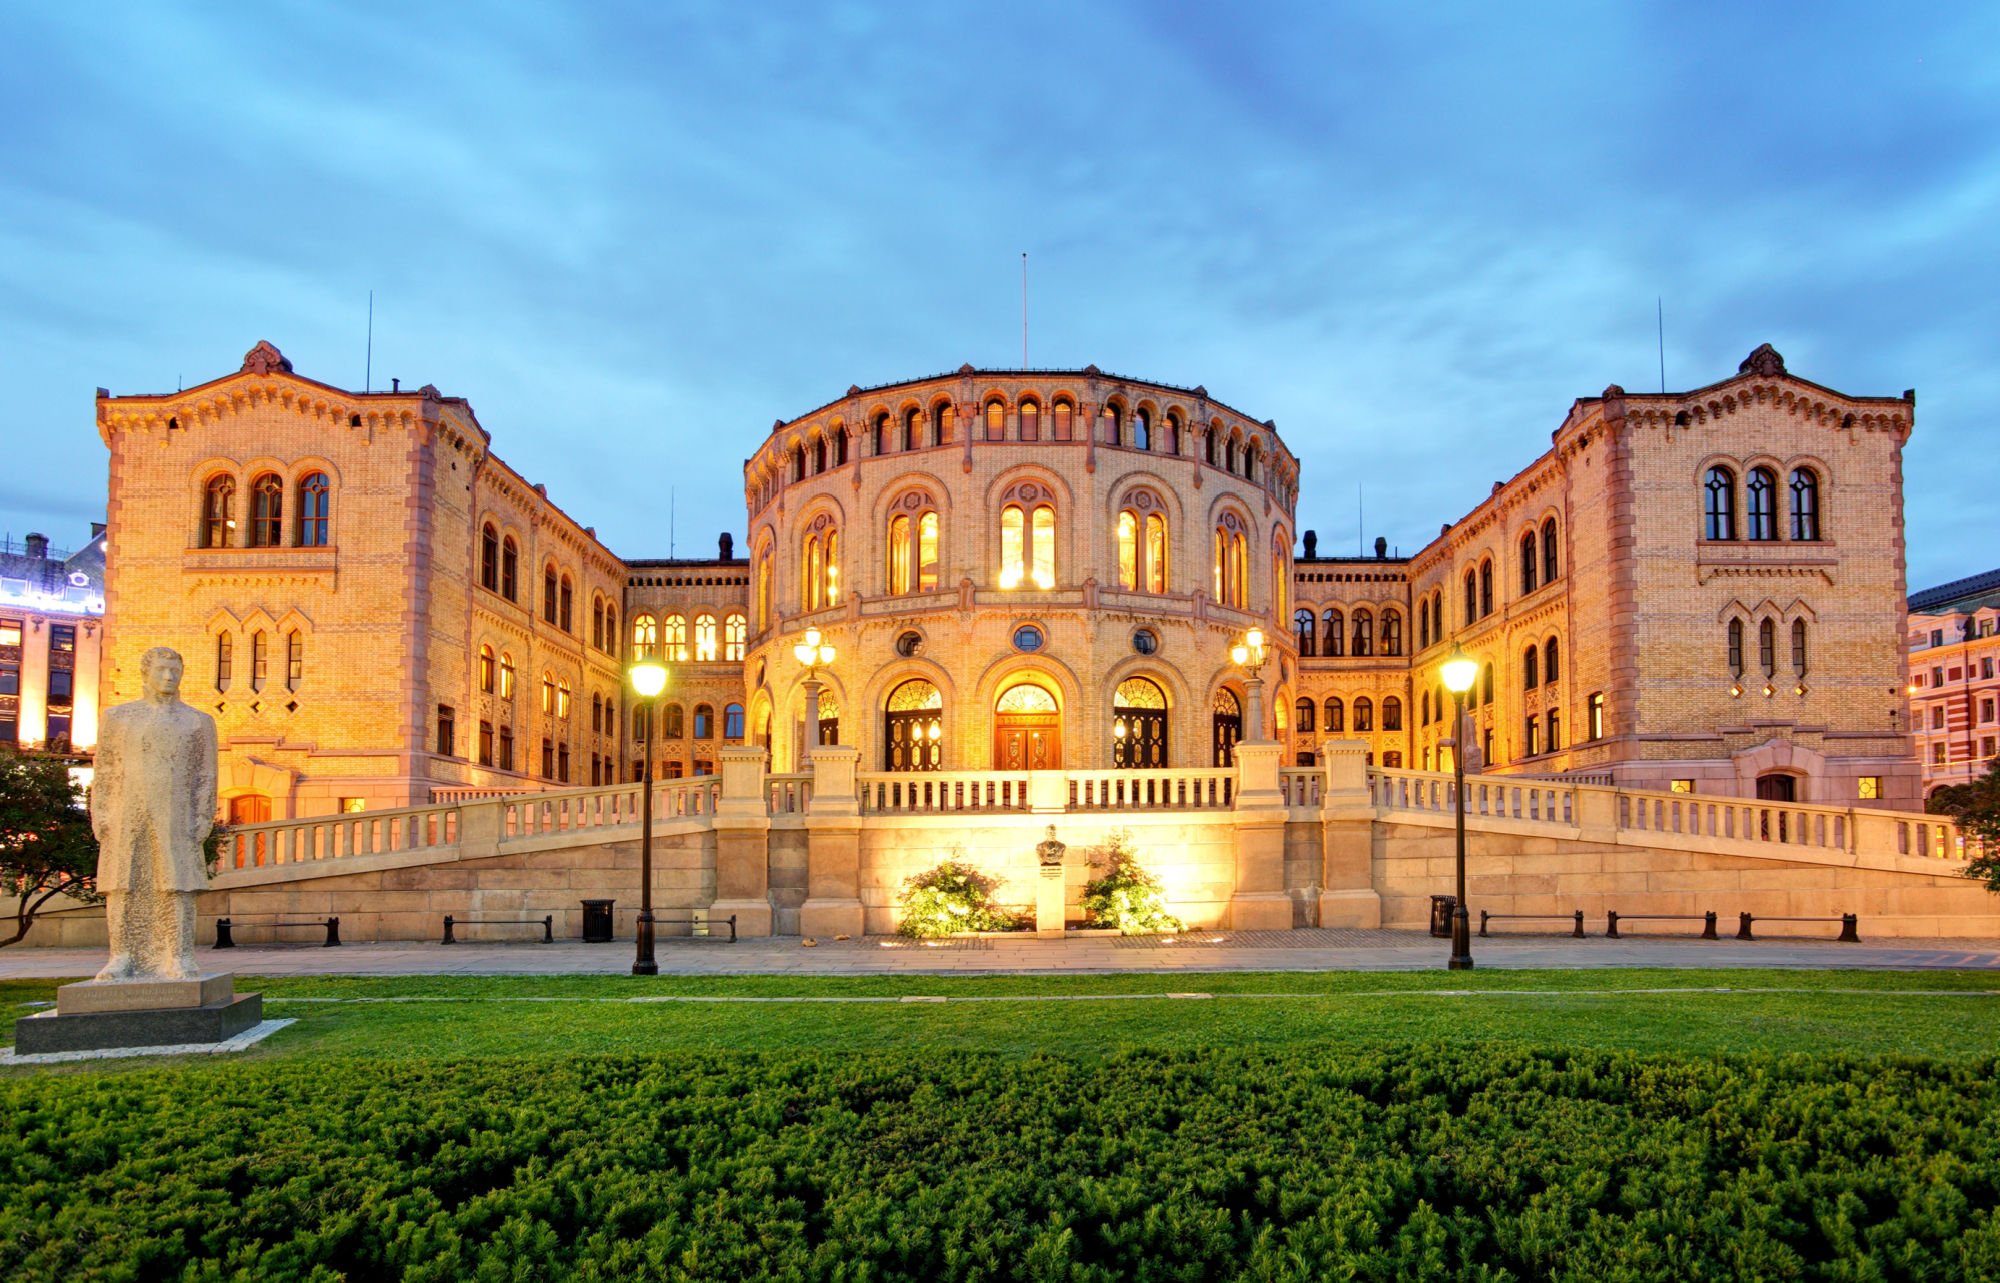 Oslo: Norway's Parliament building in the evening.